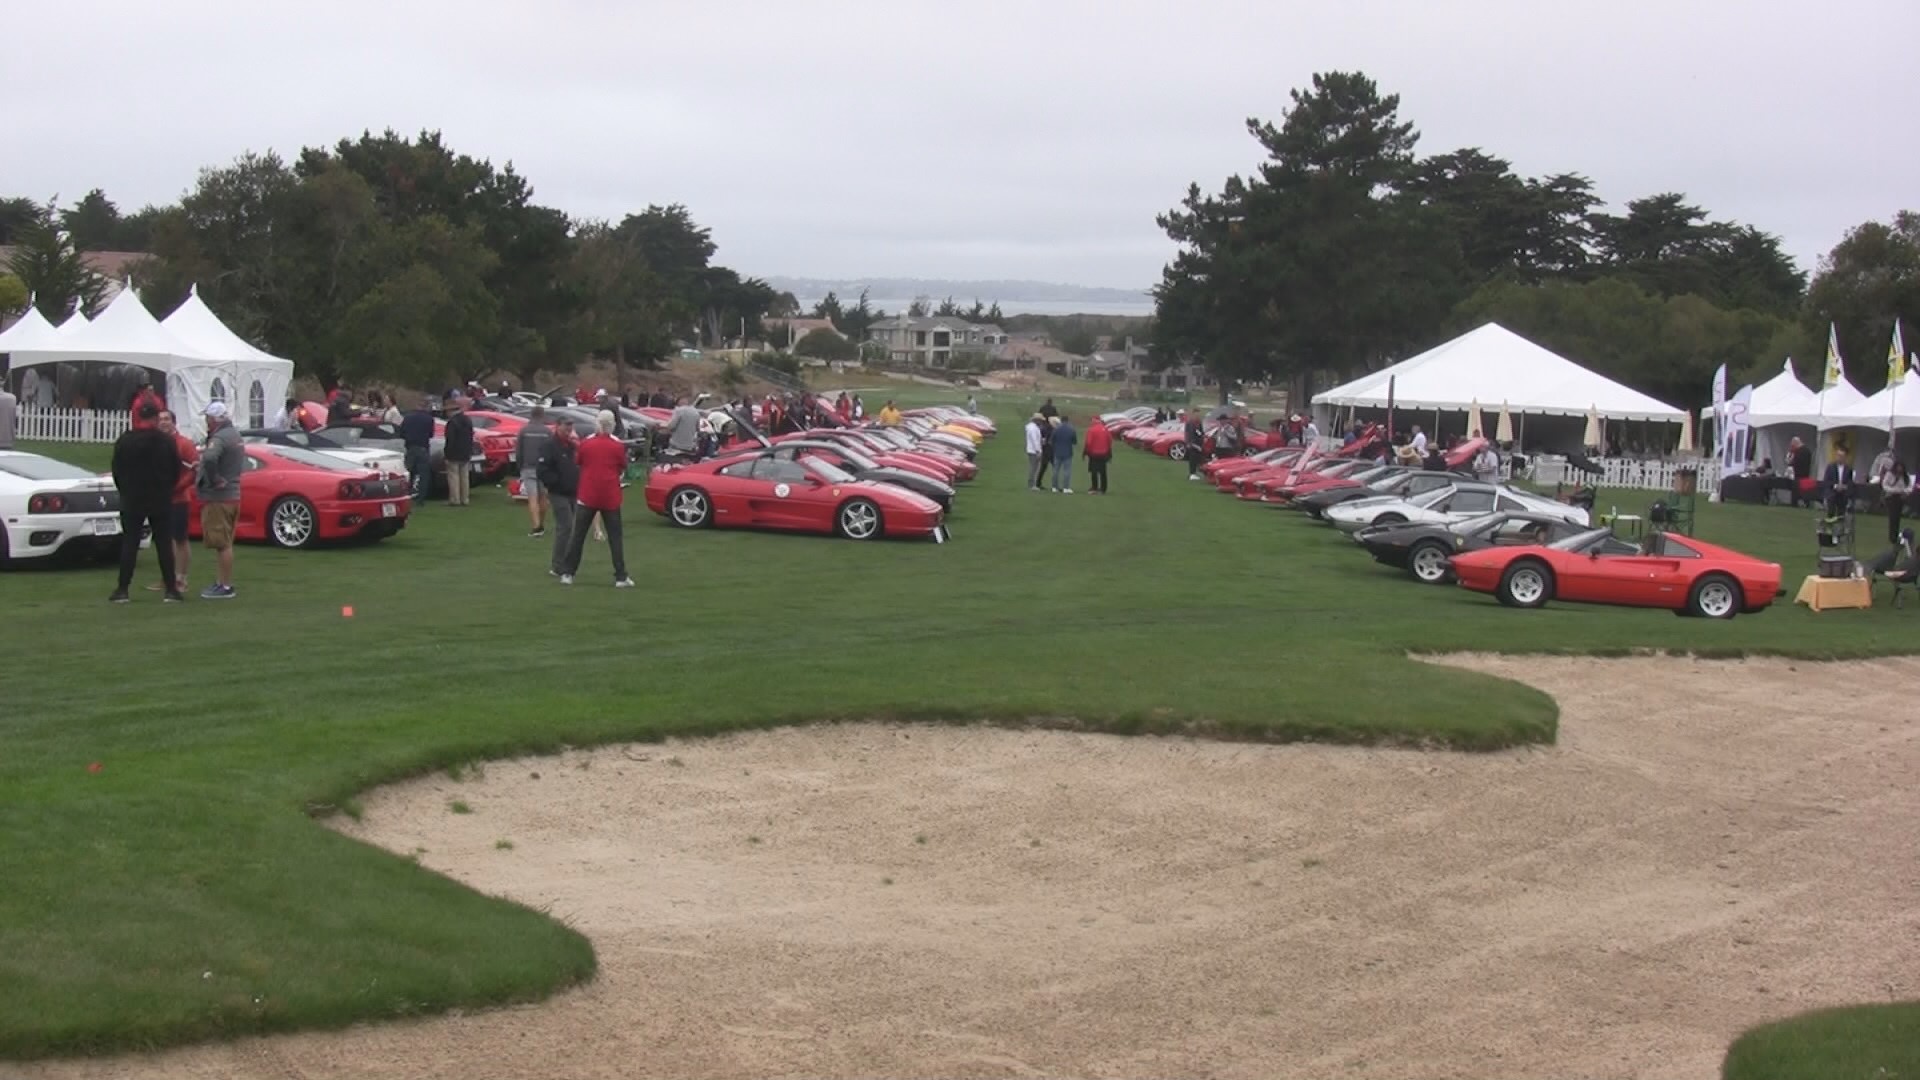 The Concours d'Elegance is celebrating its 71st meeting, but the weeks' worth of events is more than just cars. It's auctions, friends coming together & car racing.